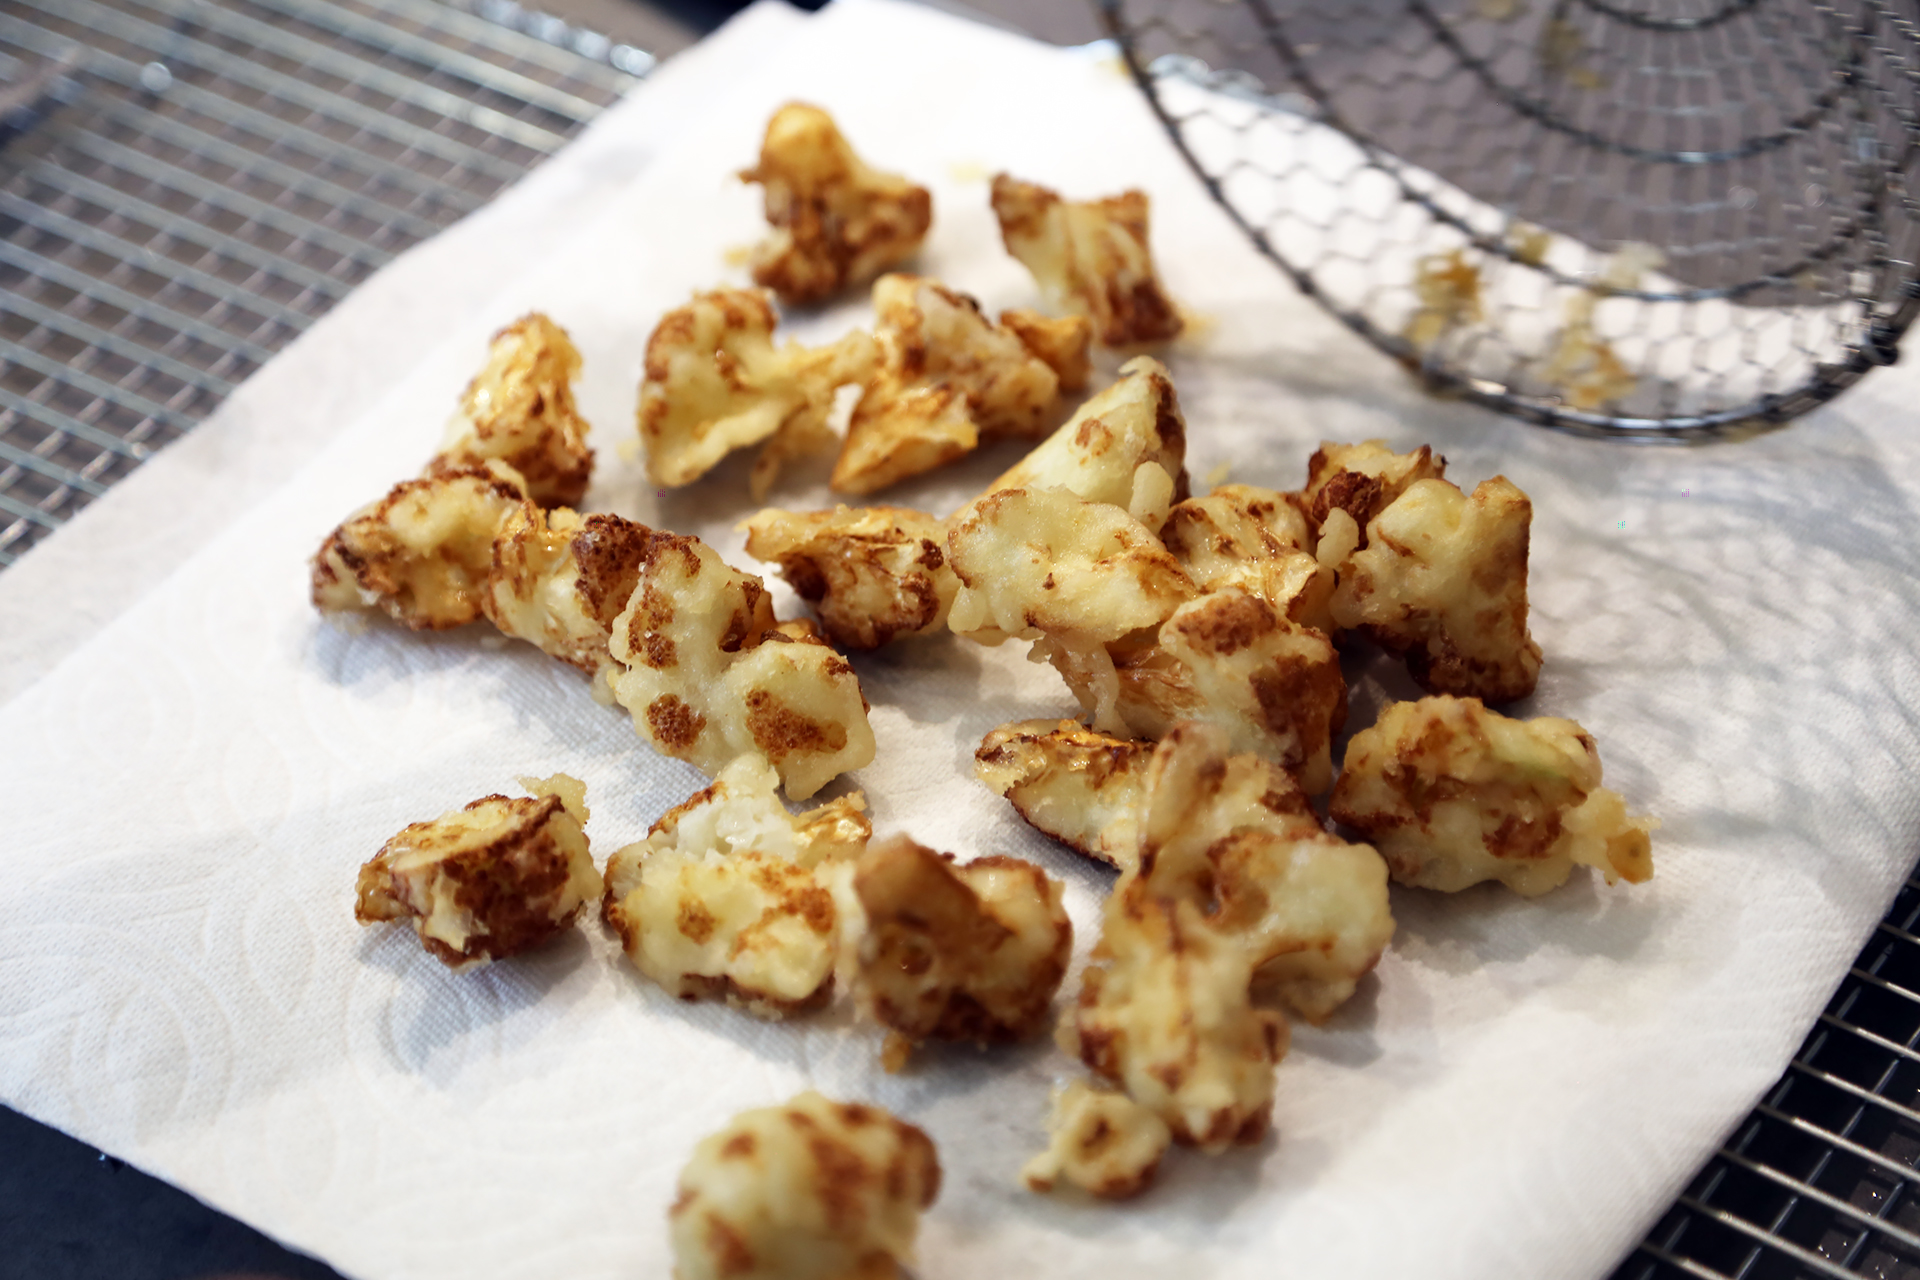 Using the spider or slotted spoon, transfer the fried cauliflower to the paper towels to drain, and season with salt.